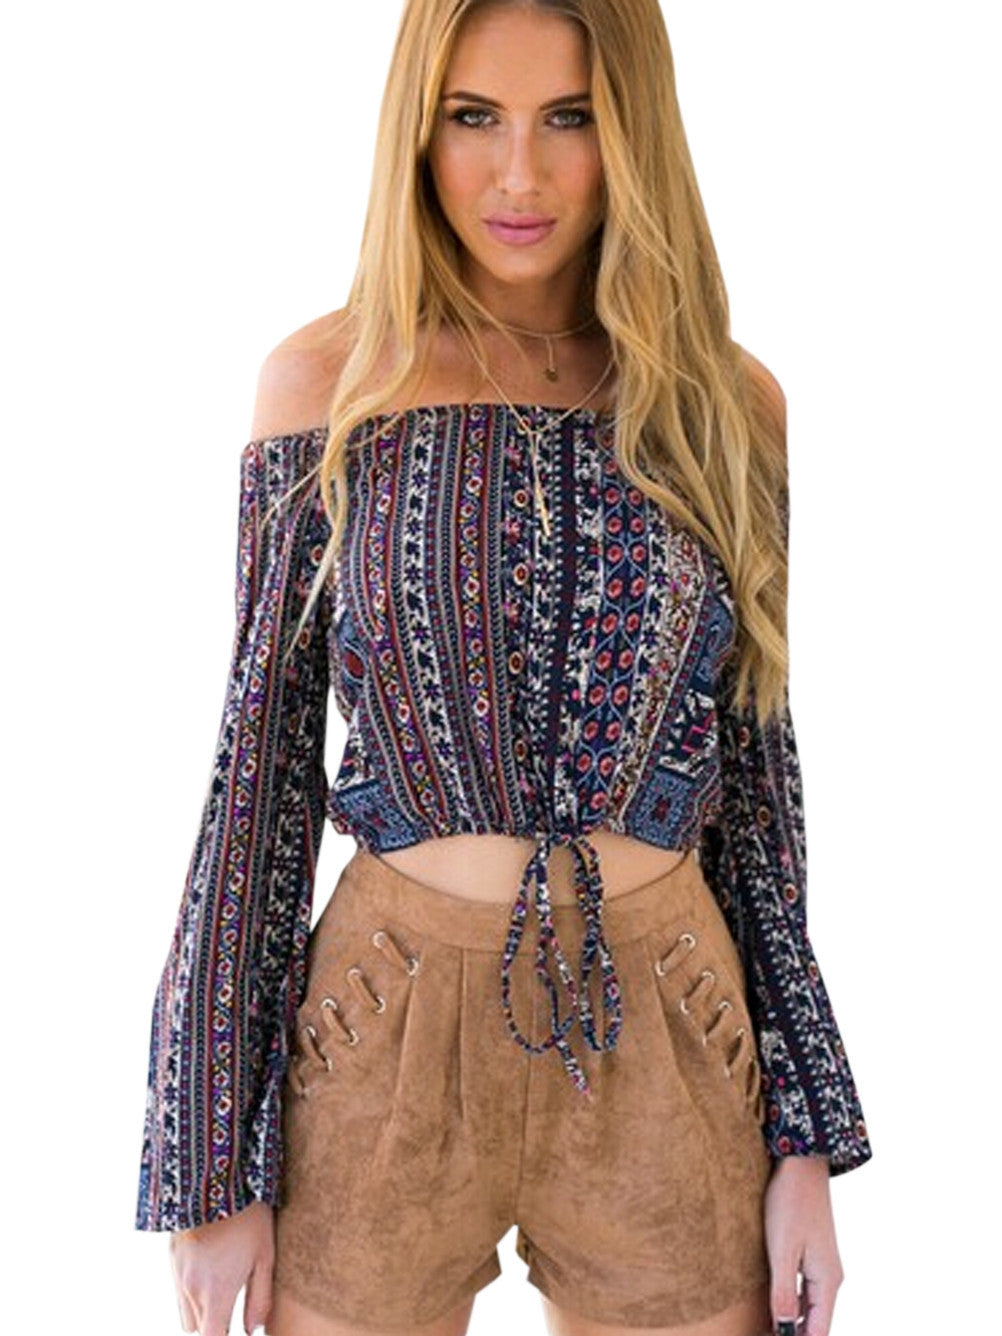 Women's Tribal, Off or On Shoulder Peasant Top